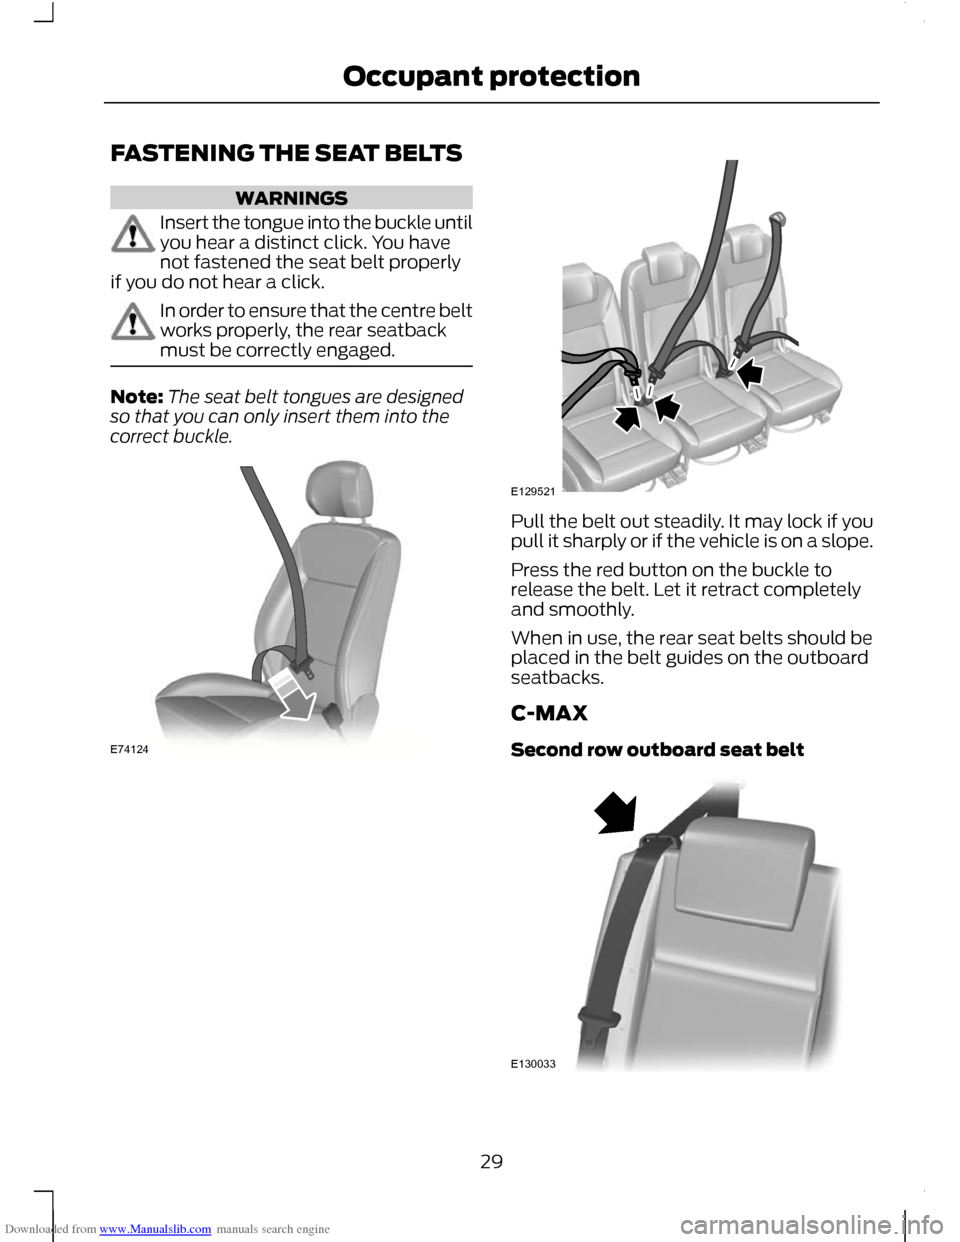 FORD C MAX 2011 2.G Owners Guide Downloaded from www.Manualslib.com manuals search engine FASTENING THE SEAT BELTS
WARNINGS
Insert the tongue into the buckle until
you hear a distinct click. You have
not fastened the seat belt proper